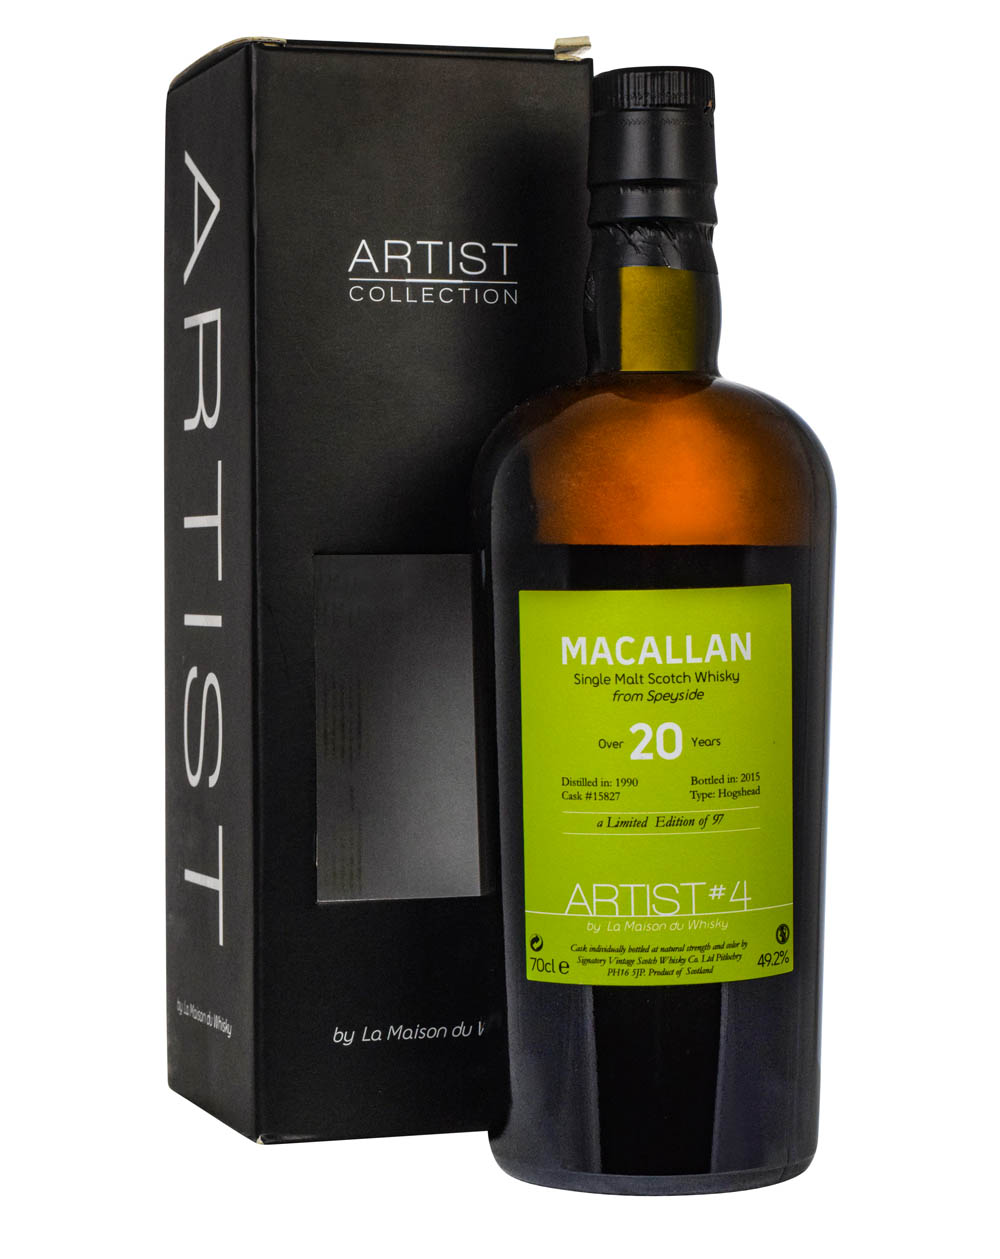 Macallan 20 Years Old LMDW Artist #4 1990-2015 Box Must Have Malts MHM